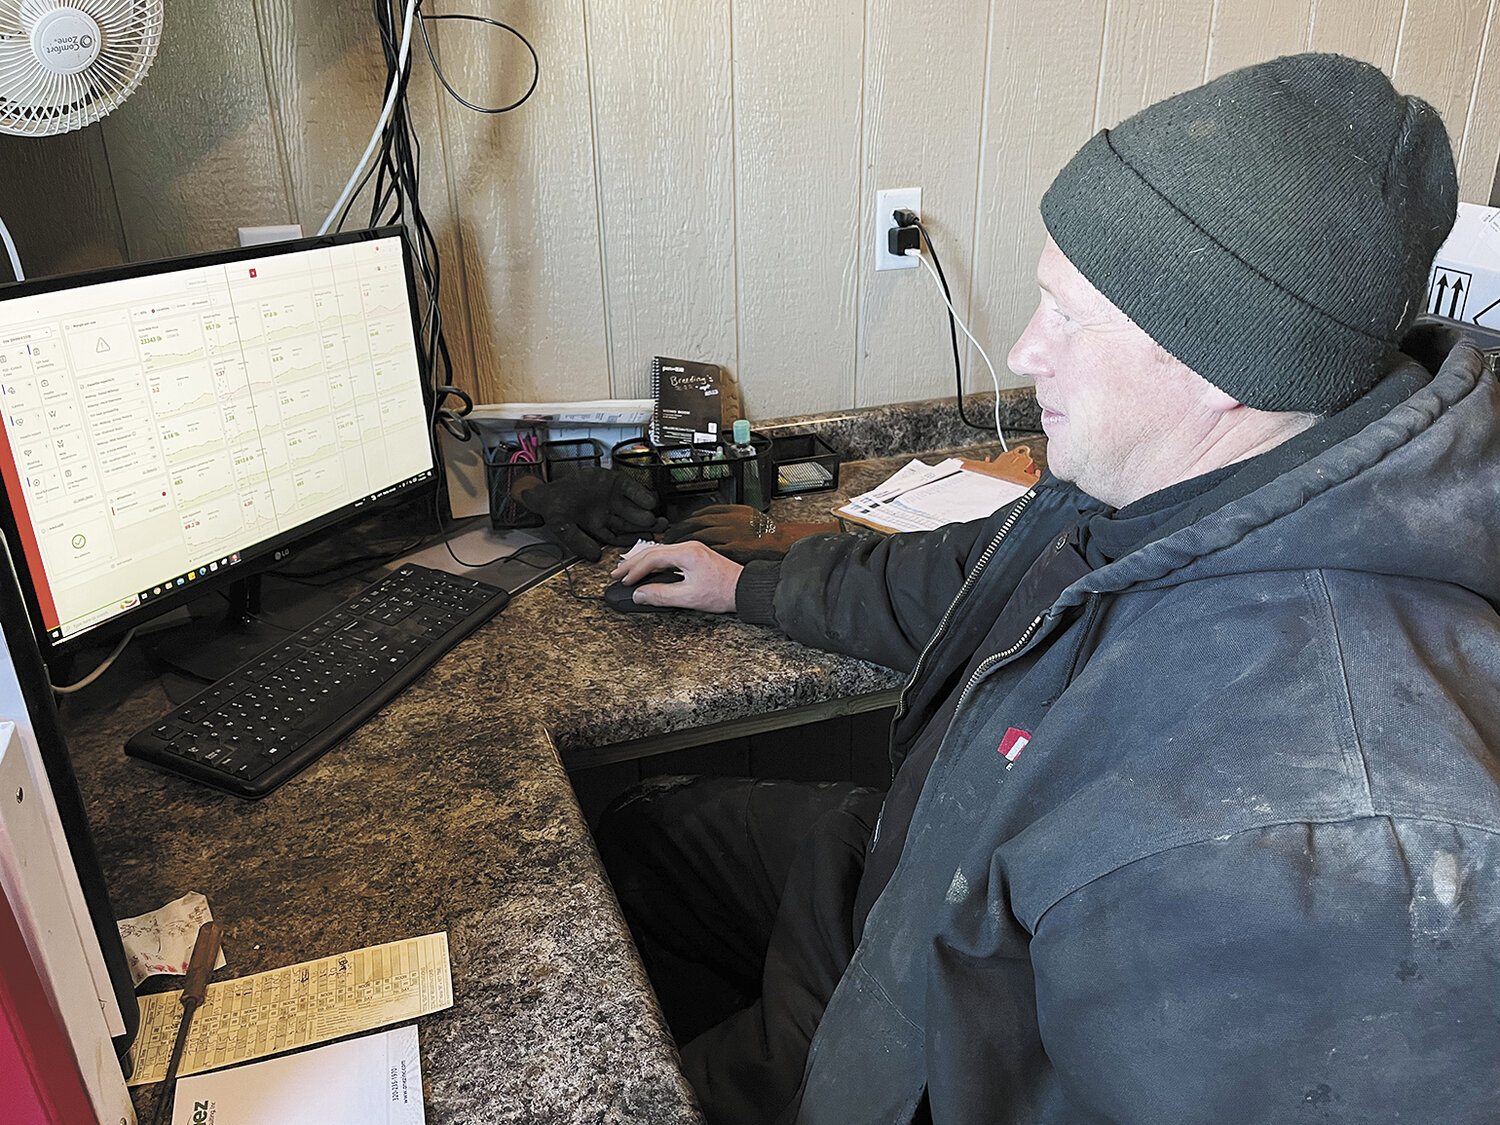 John Vander Waal uses the information gathered by his milking robots to monitor his dairy herd’s health and milk production Jan. 16 on his farm near Sioux Center, Iowa. Vander Waal has used selective genetics to increase milking speed and milk components.